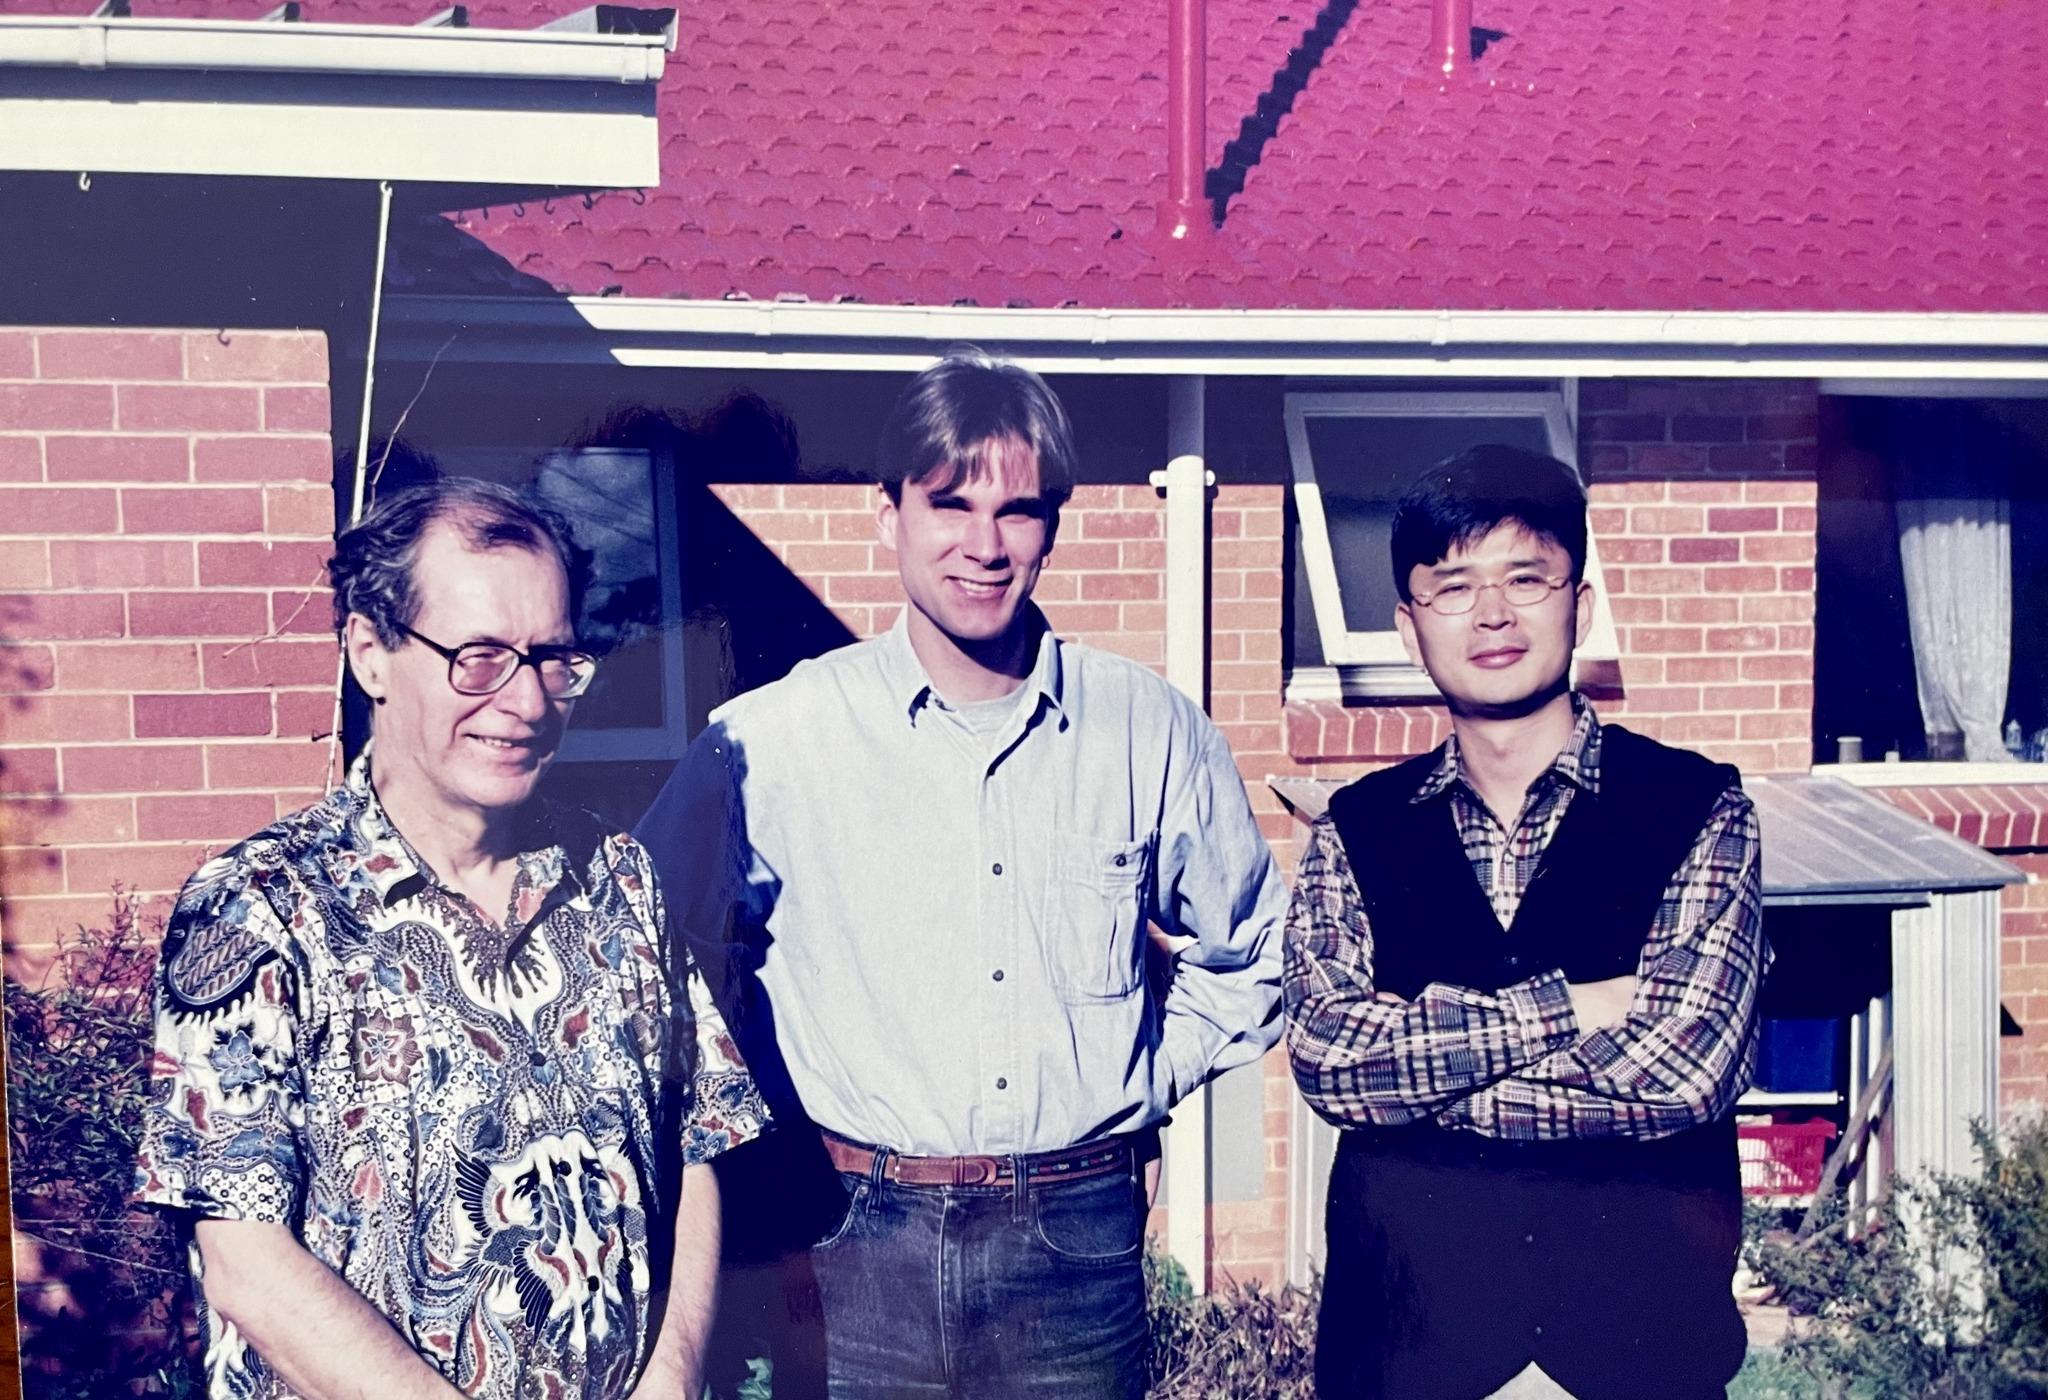 Harold Crouch (left) with PhD students, Marcus Mietzner (now an Indonesia specialist based at ANU) and Inwon Hwang (South Korea's leading Malaysian politics expert), c. 1997.